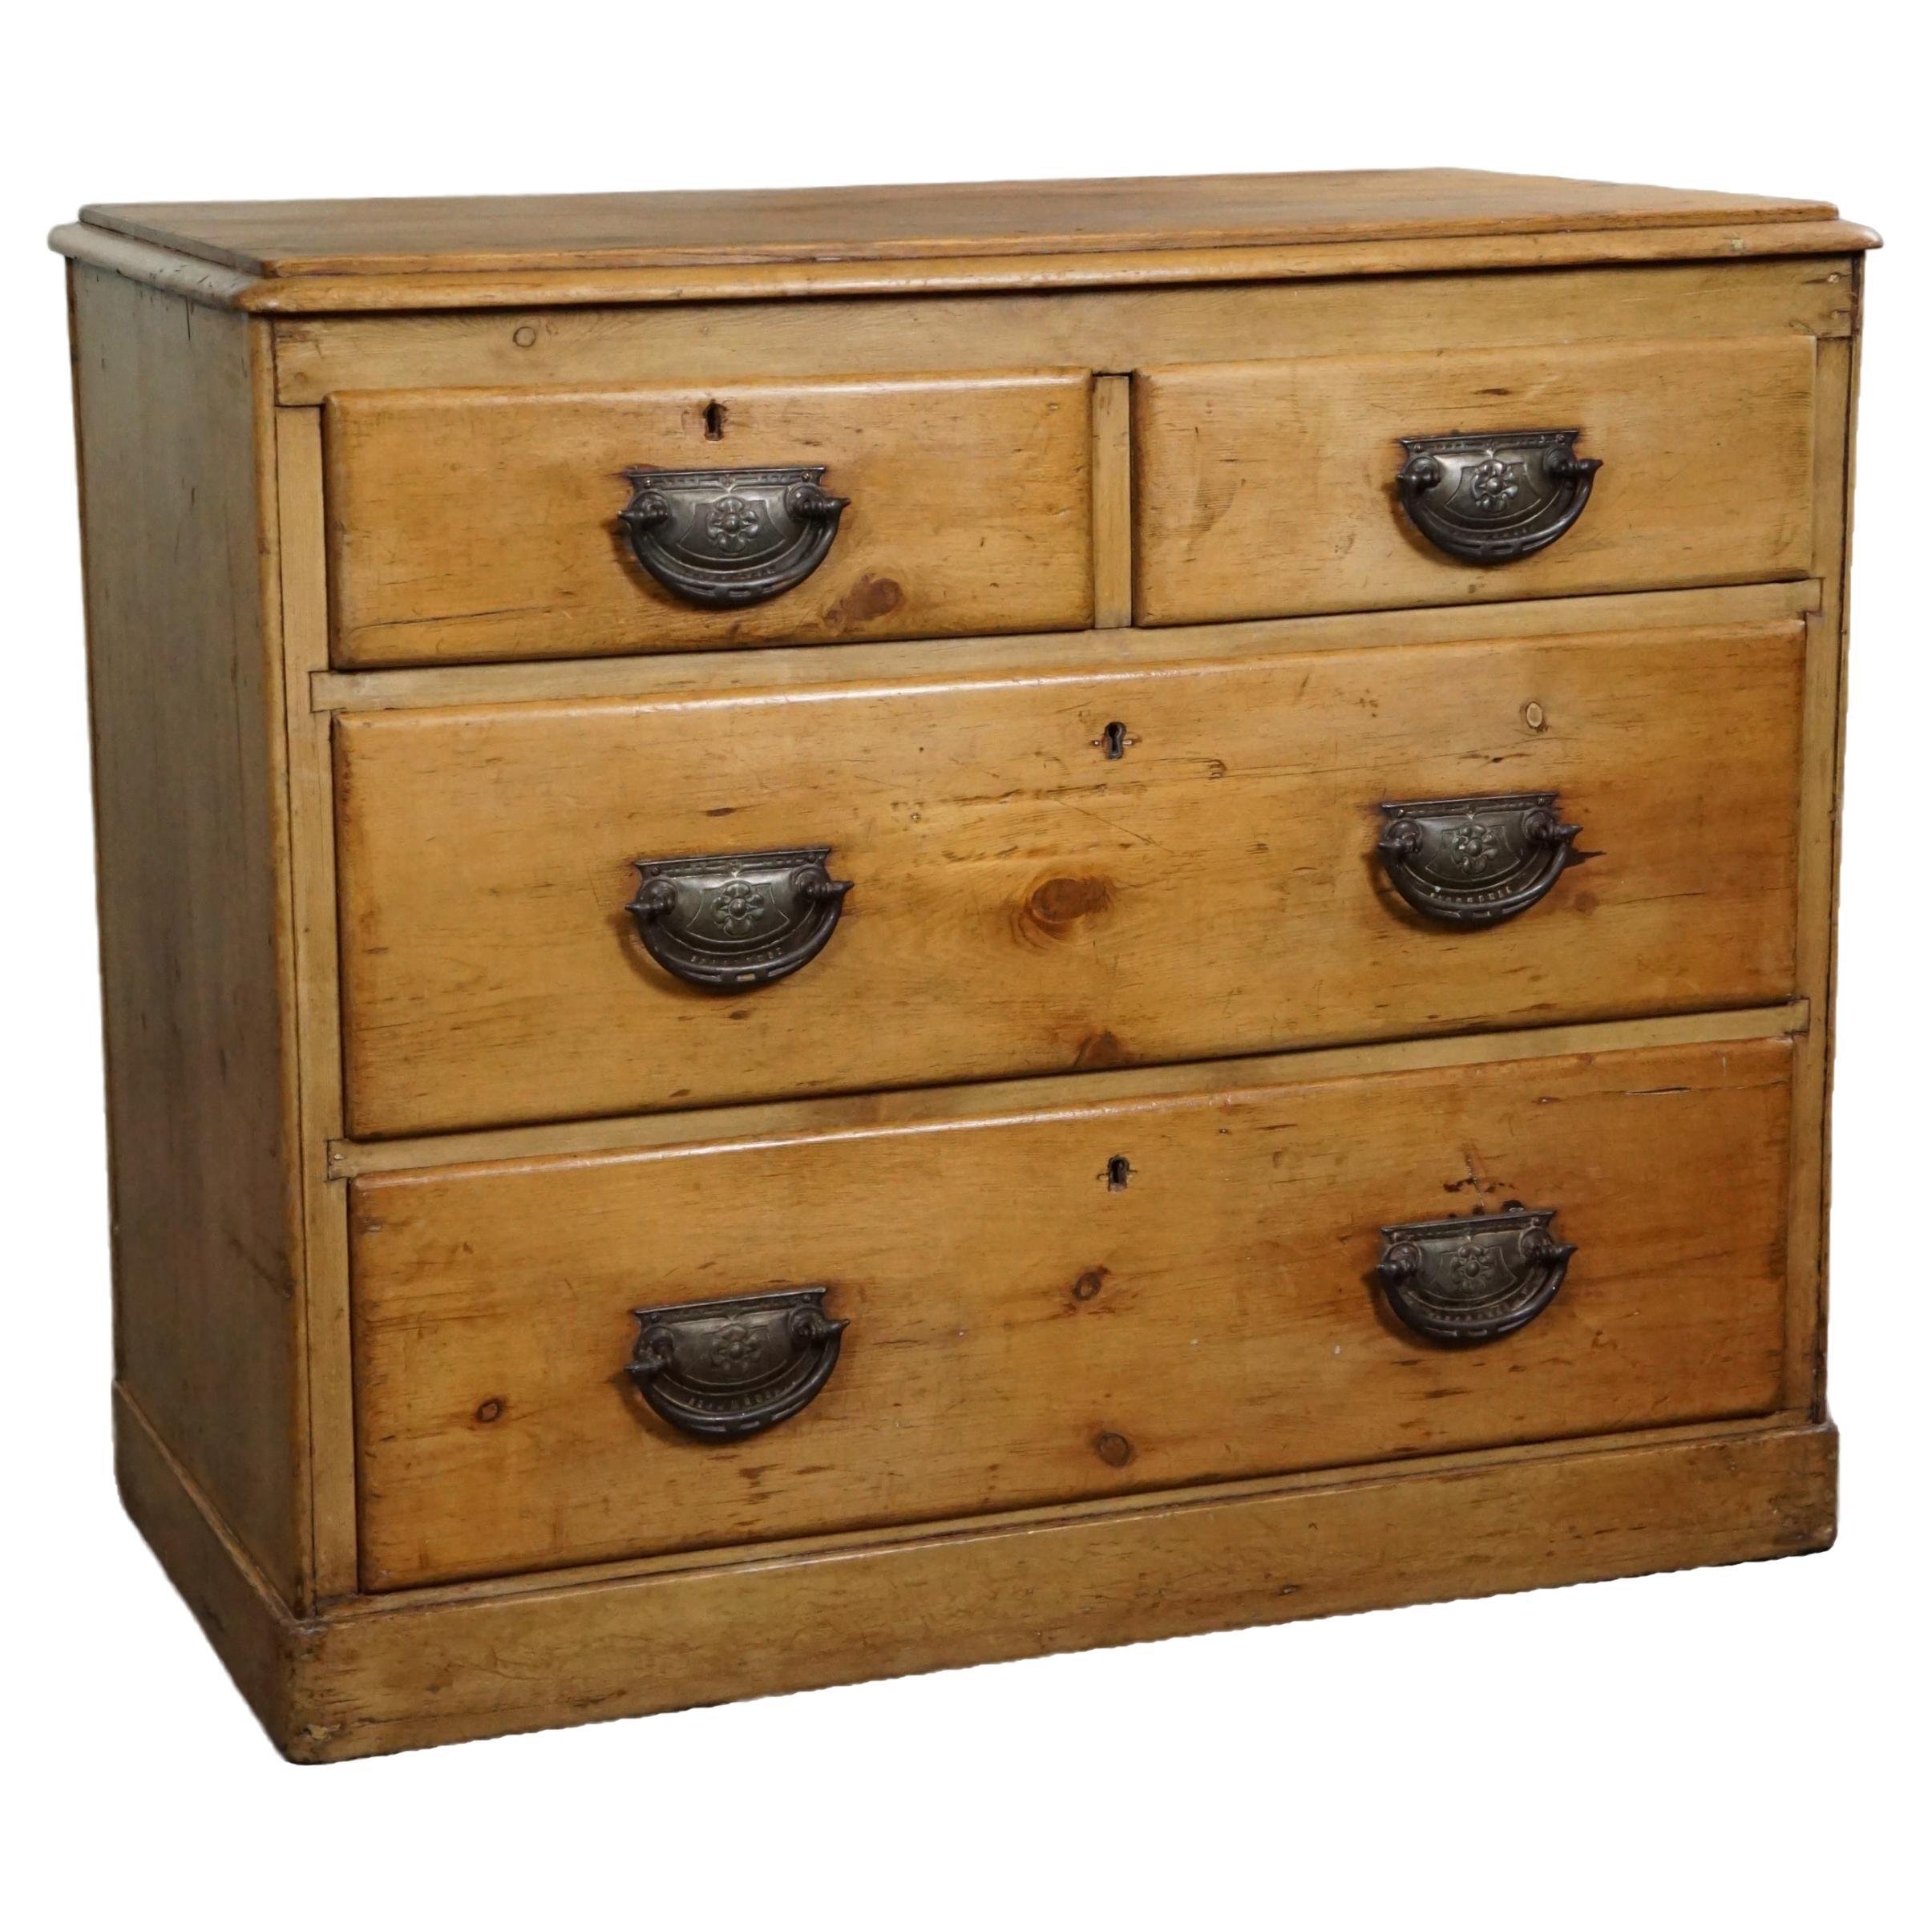 Old pine antique English chest of drawers with four drawers